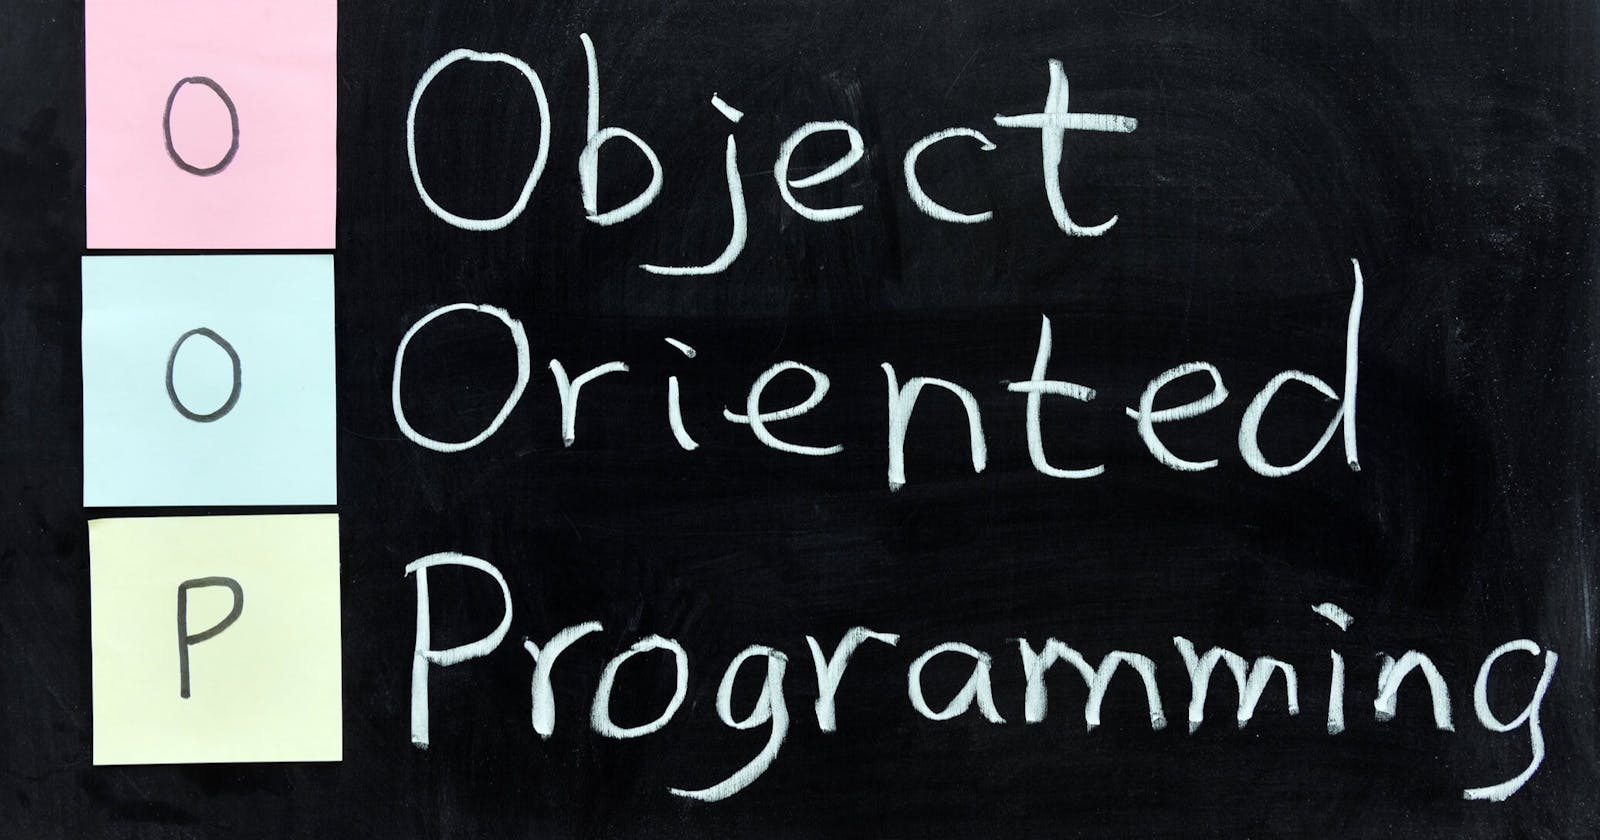 Introduction of Object-Oriented Programming